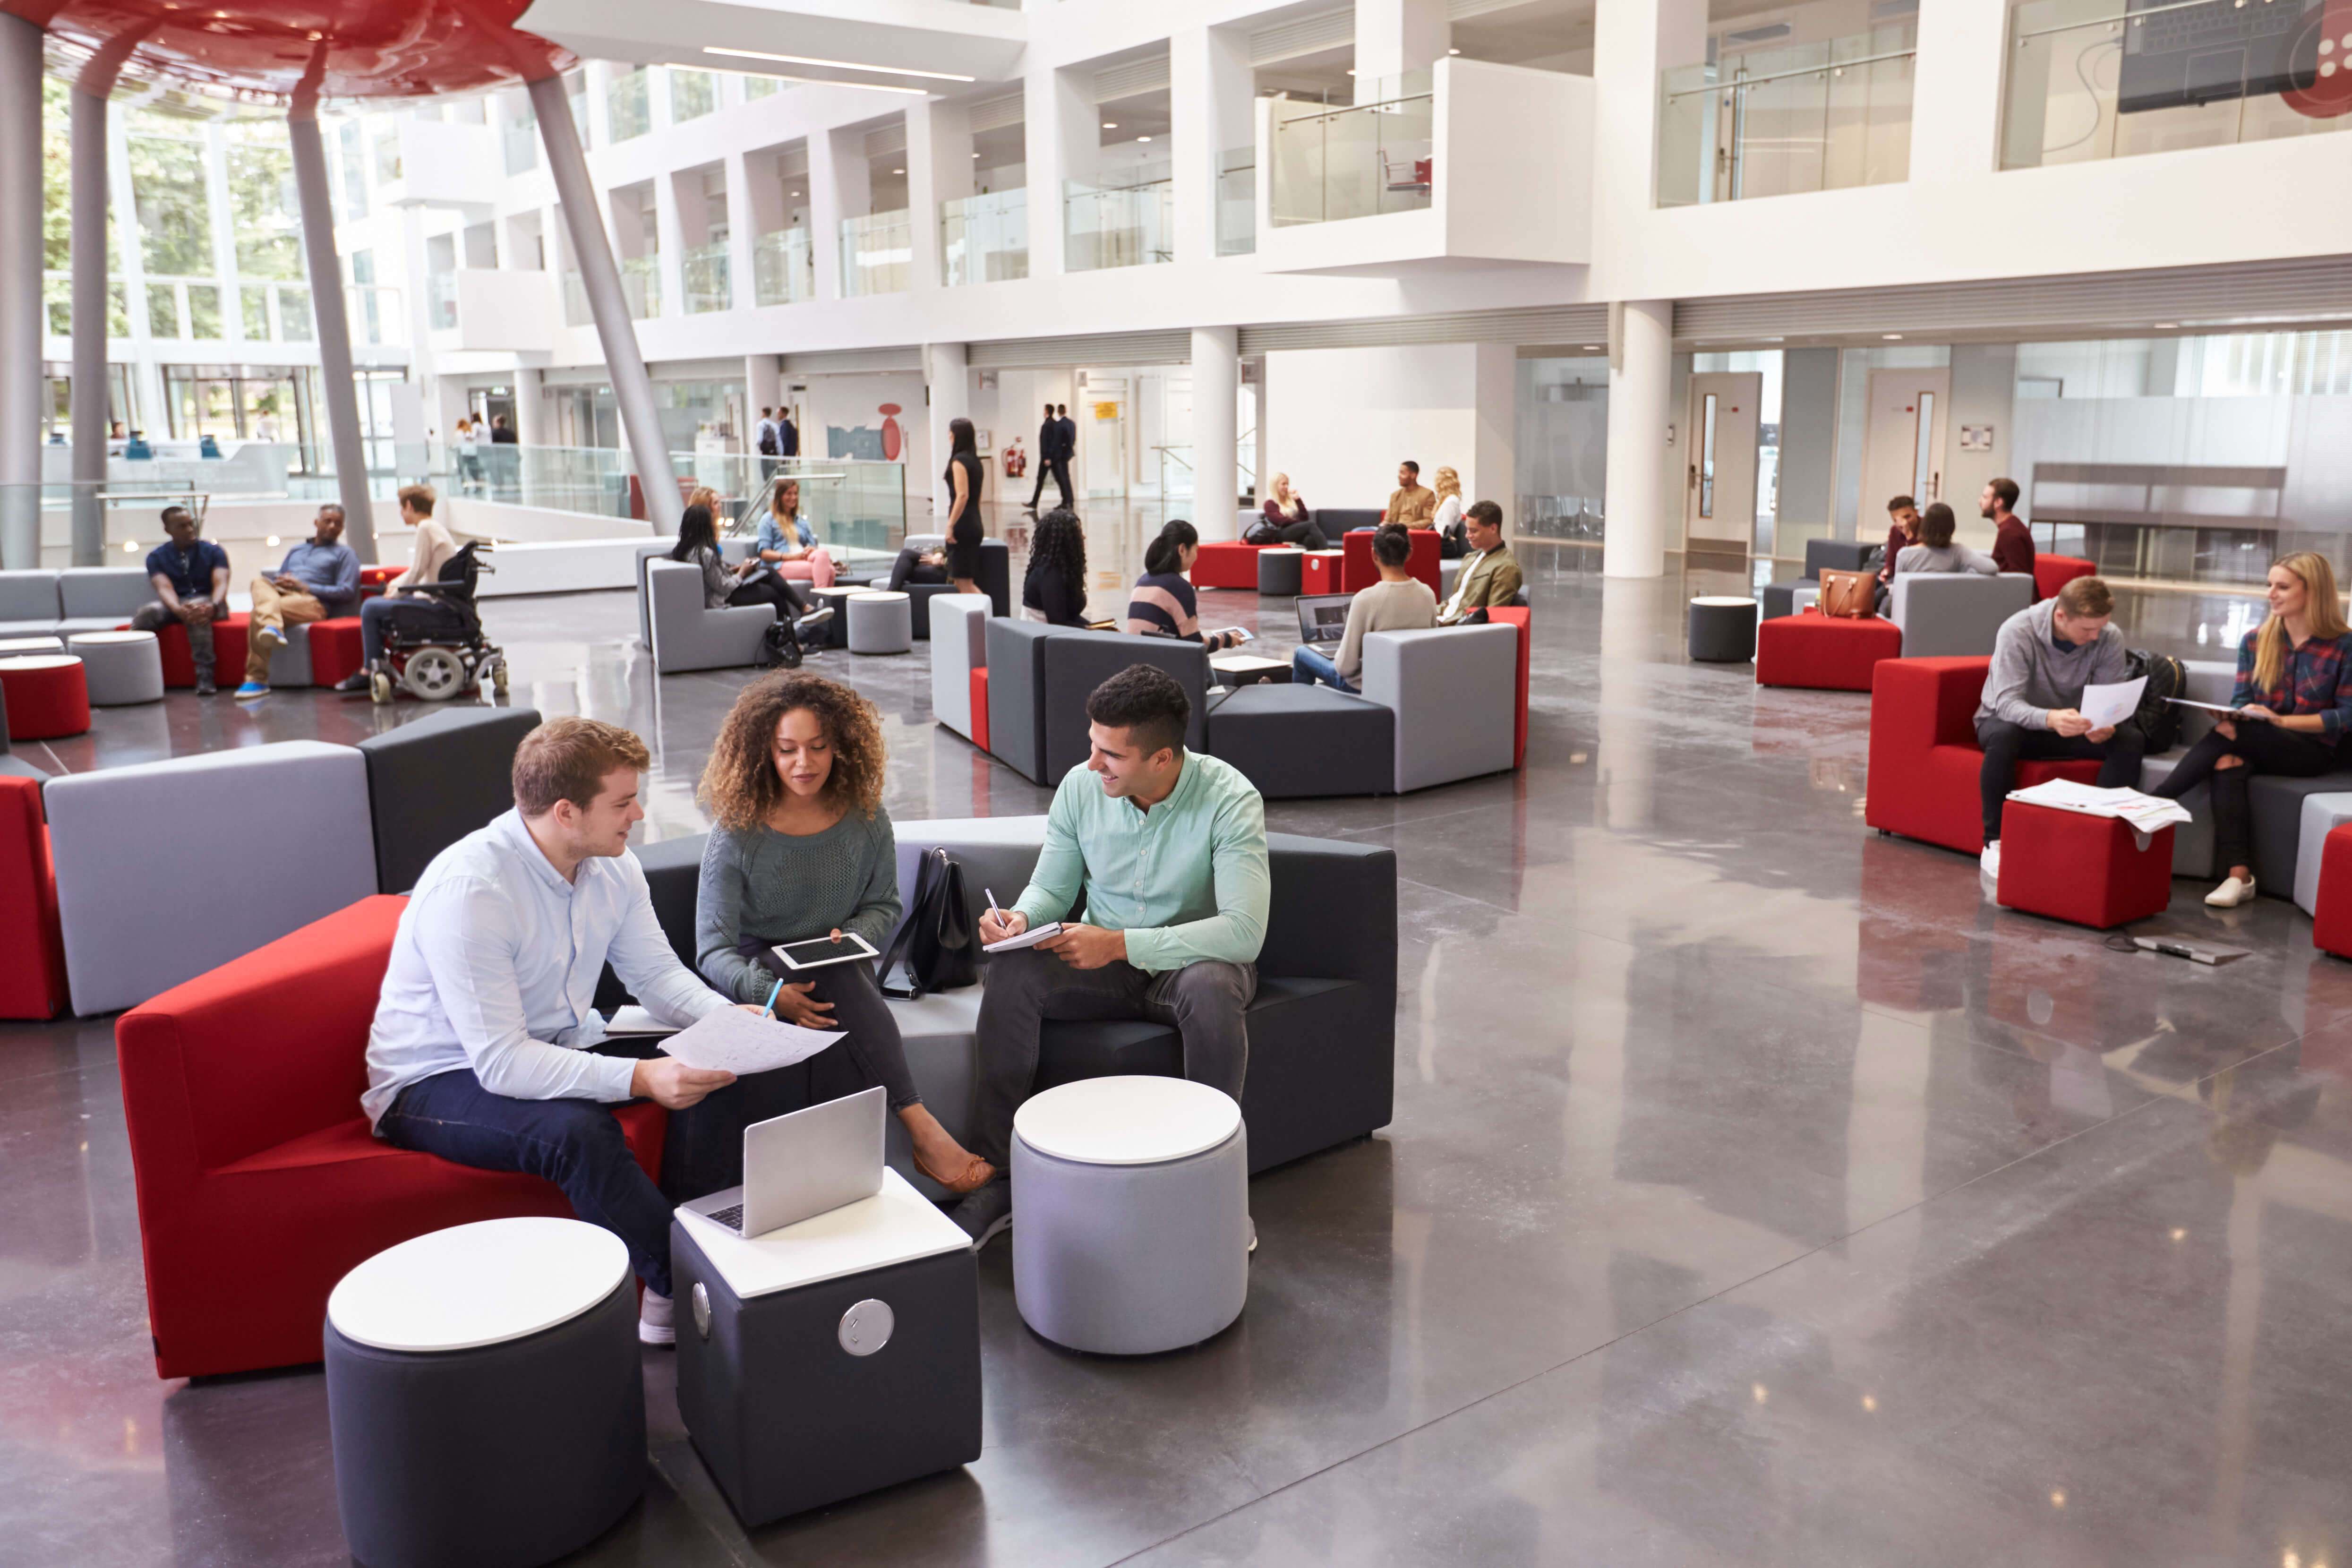 Millennials are changing work place design